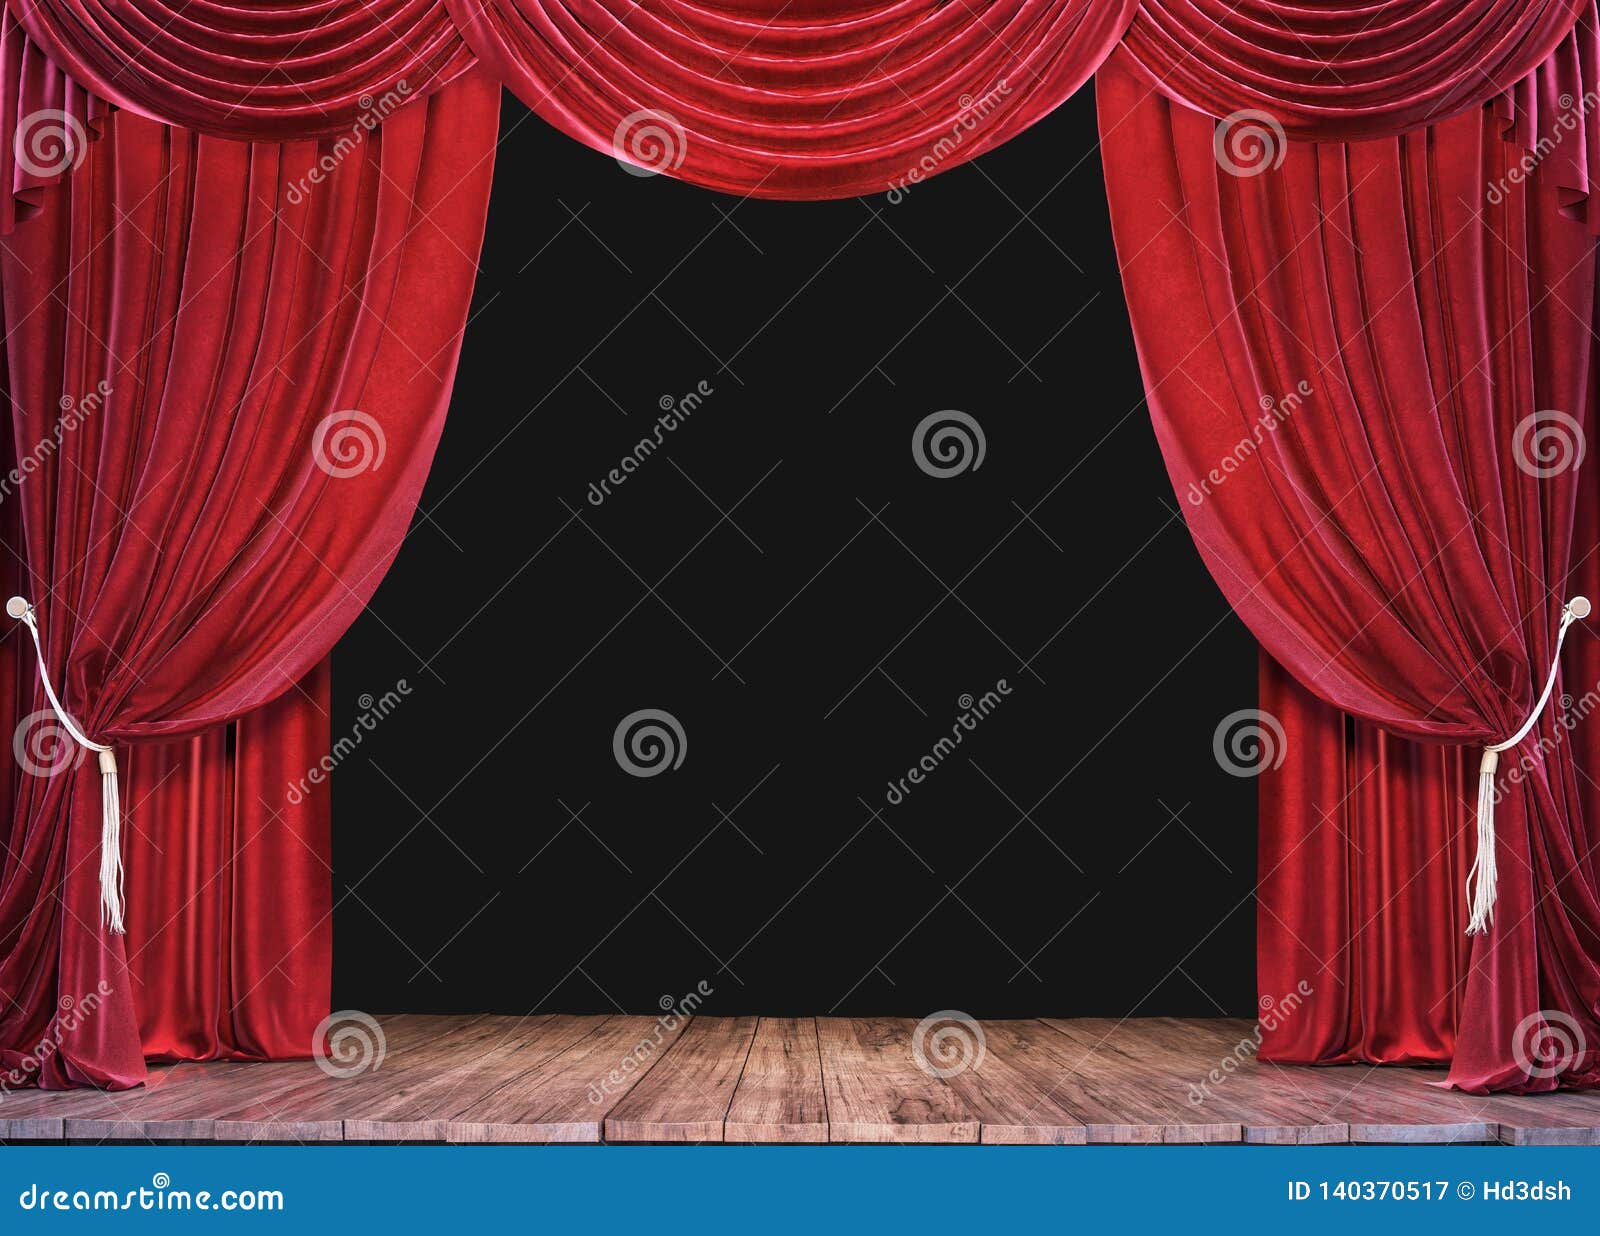 empty theater stage with wood plank floor and open red curtains